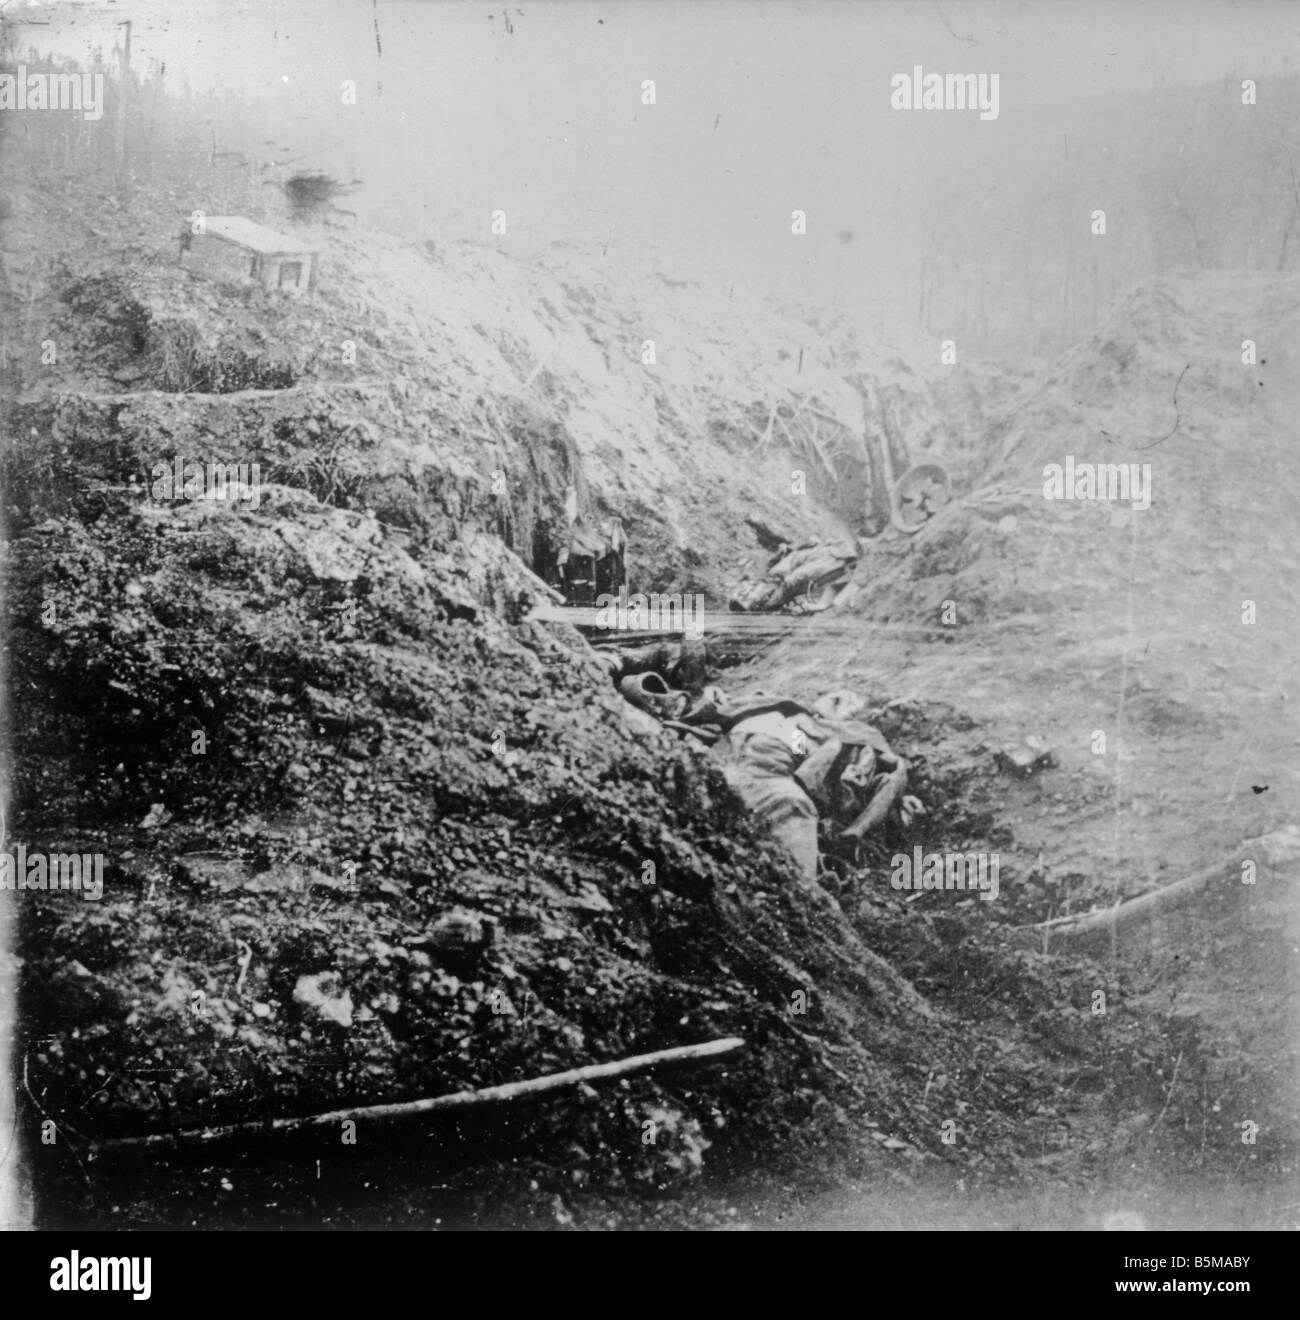 2 G55 W1 1916 26 German soldiers killed in action History WWI Western Front Trench warfare Bodies of German soldiers killed in a Stock Photo